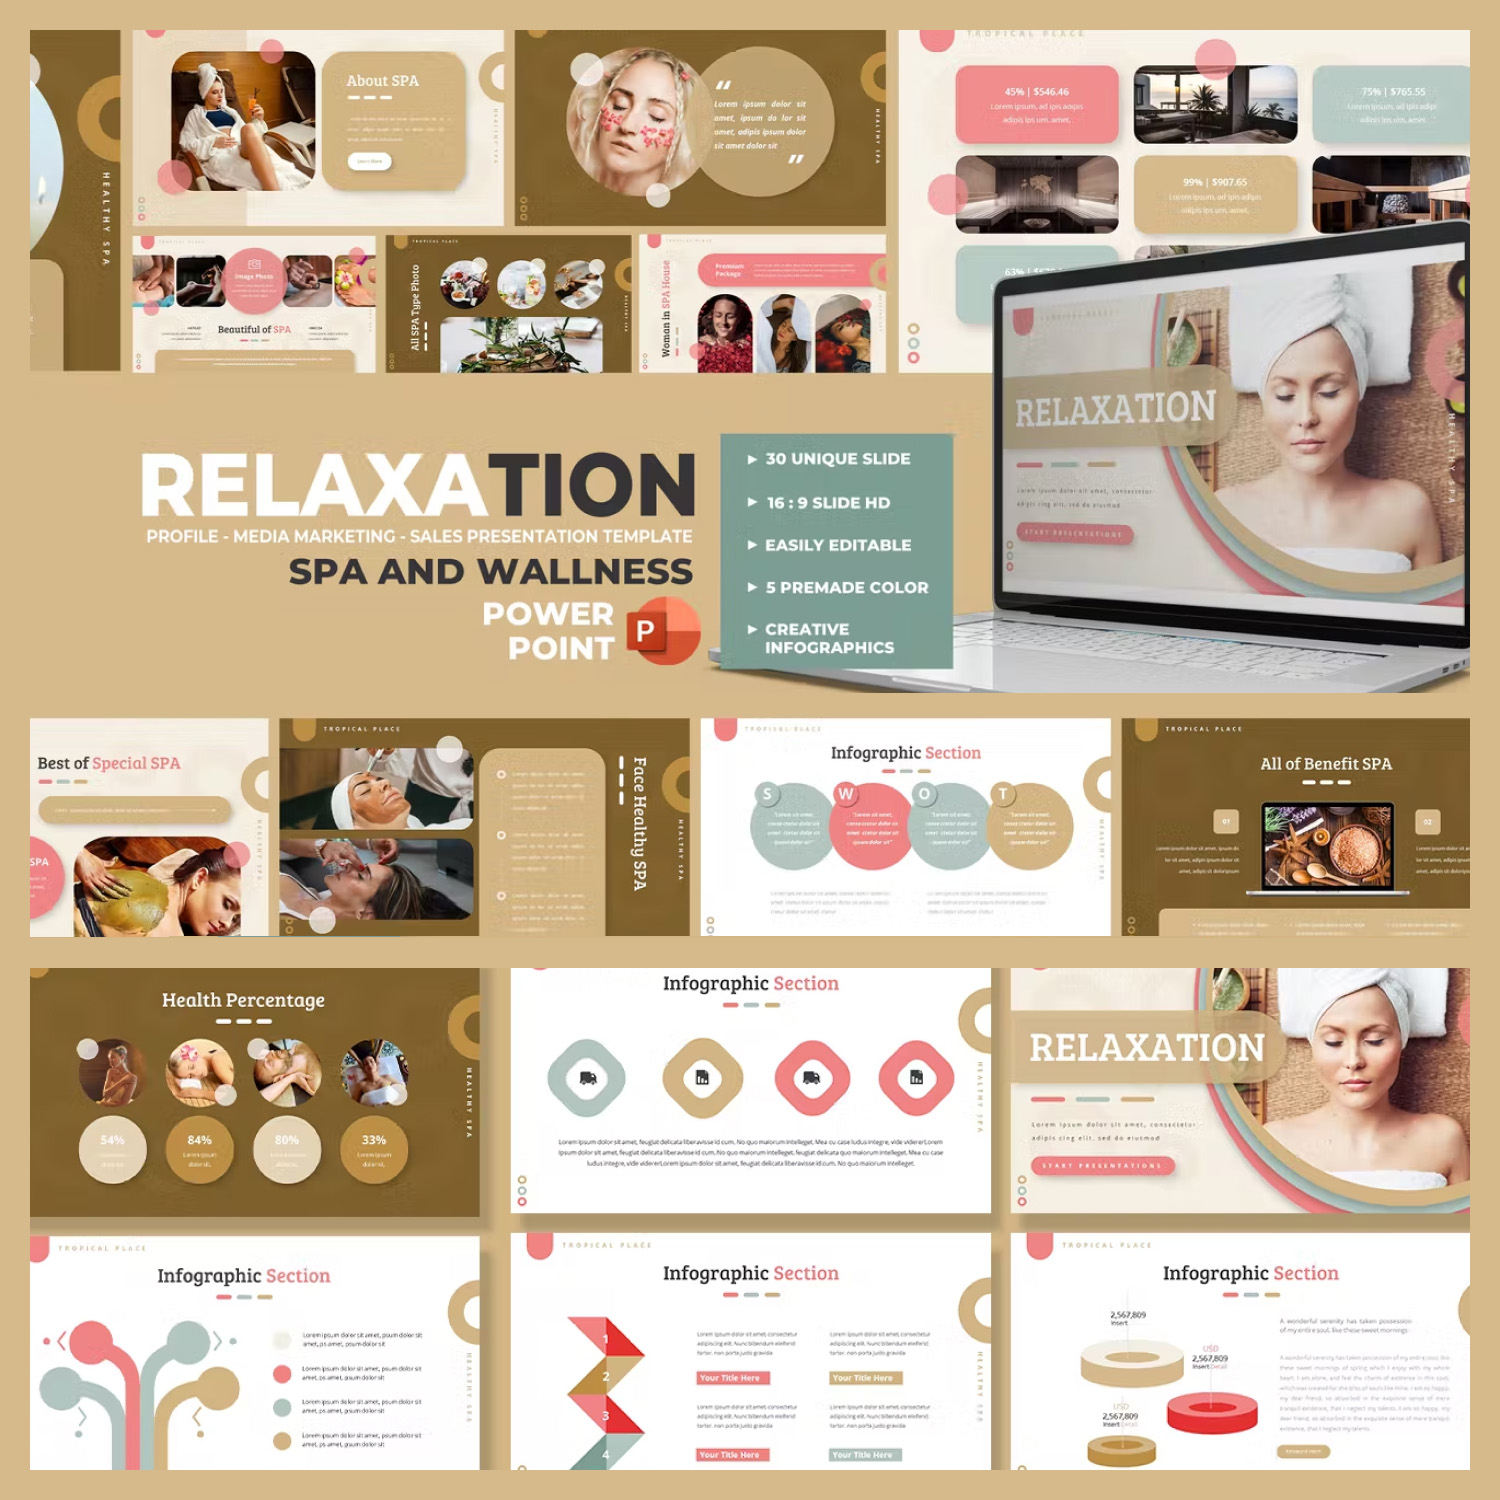 Relaxation spa wellness presentation preview.